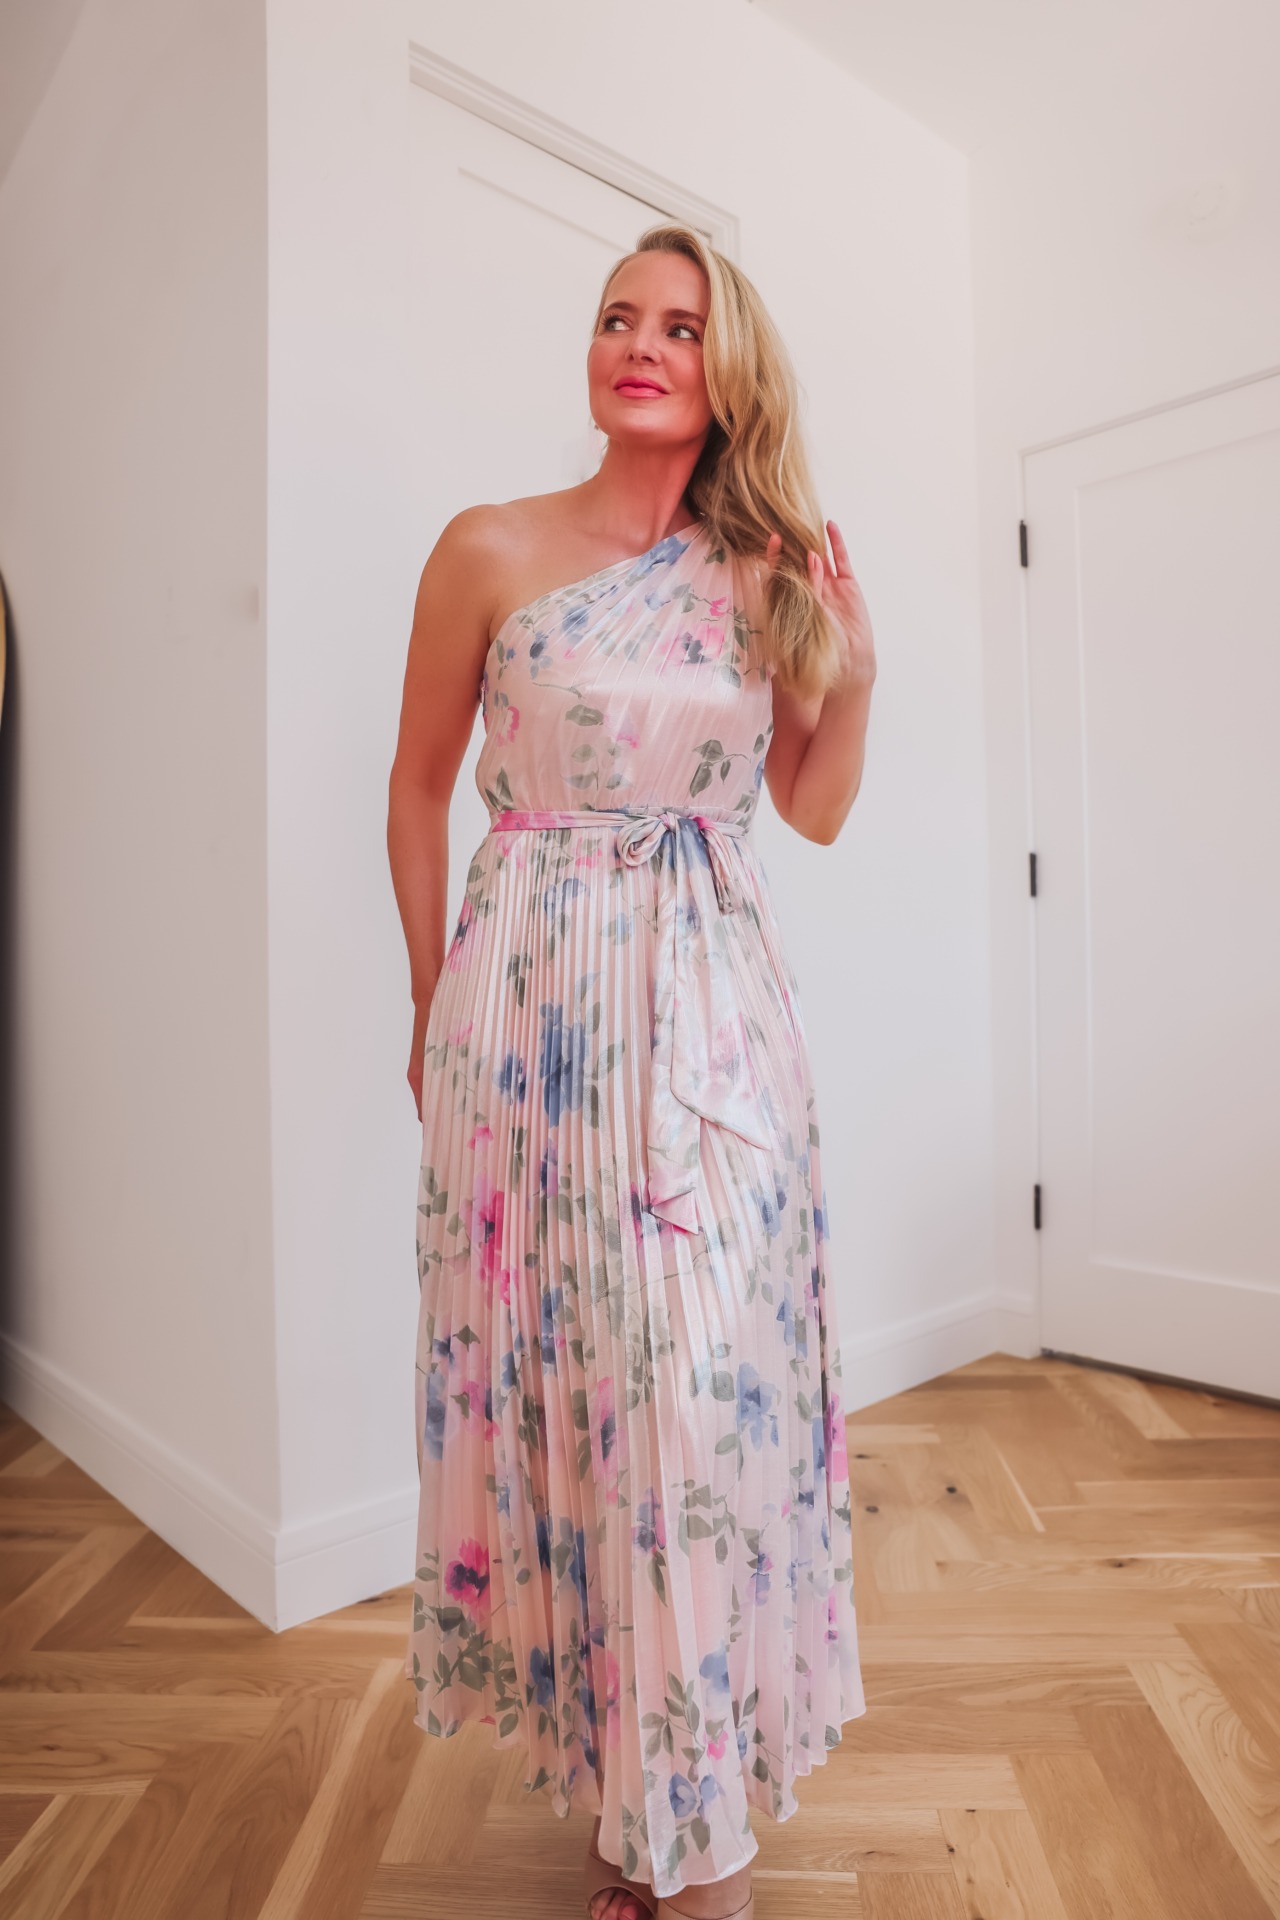 Mom outfits for every occasion-summer mom outfits, chic mom outfits, comfortable mom outfits for summer, wedding guest dress, summer wedding guest dress, summer wedding guest dresses, best summer wedding guest dresses, summer wedding guest dresses by dress code, wedding dress codes, erin busbee, busbee style, fashion over 40, pink floral one shoulder midi dress